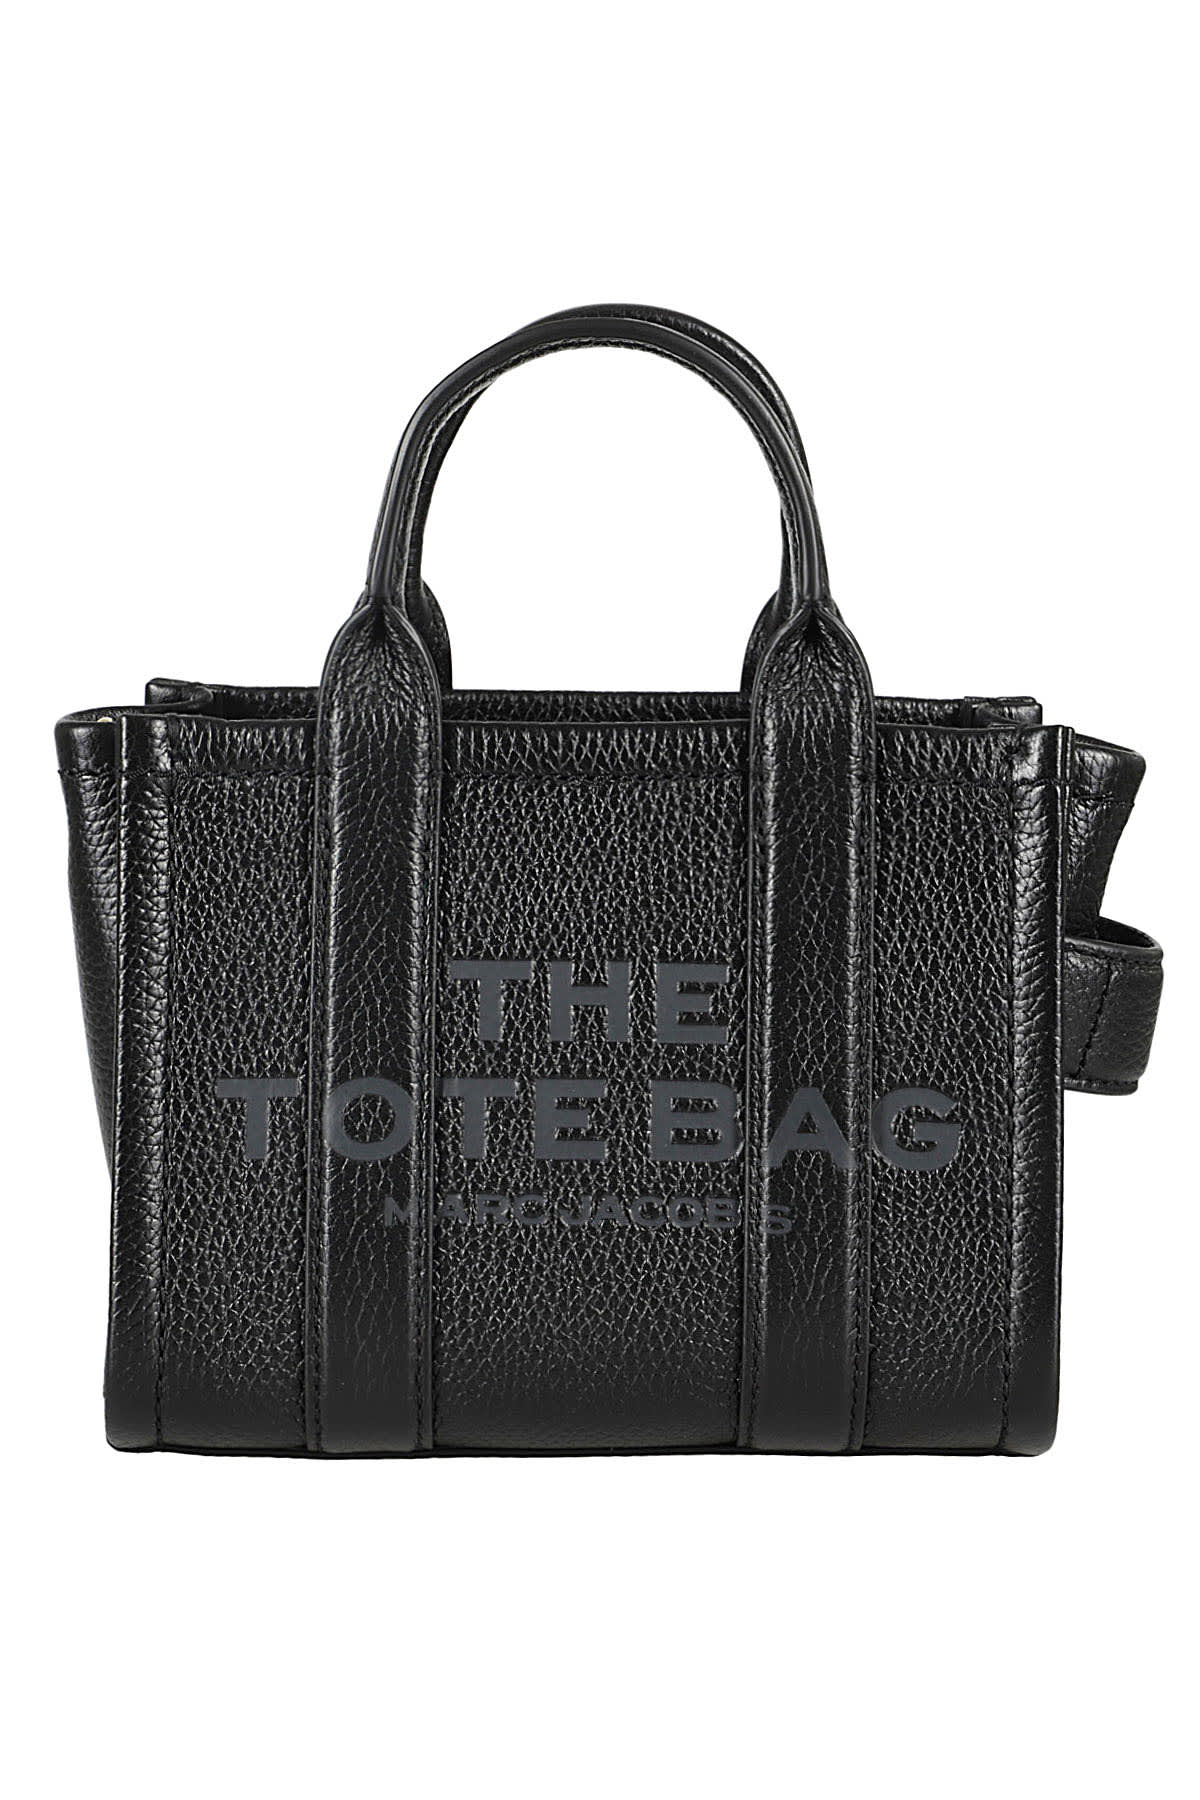 Marc Jacobs The Mini Tote In Black